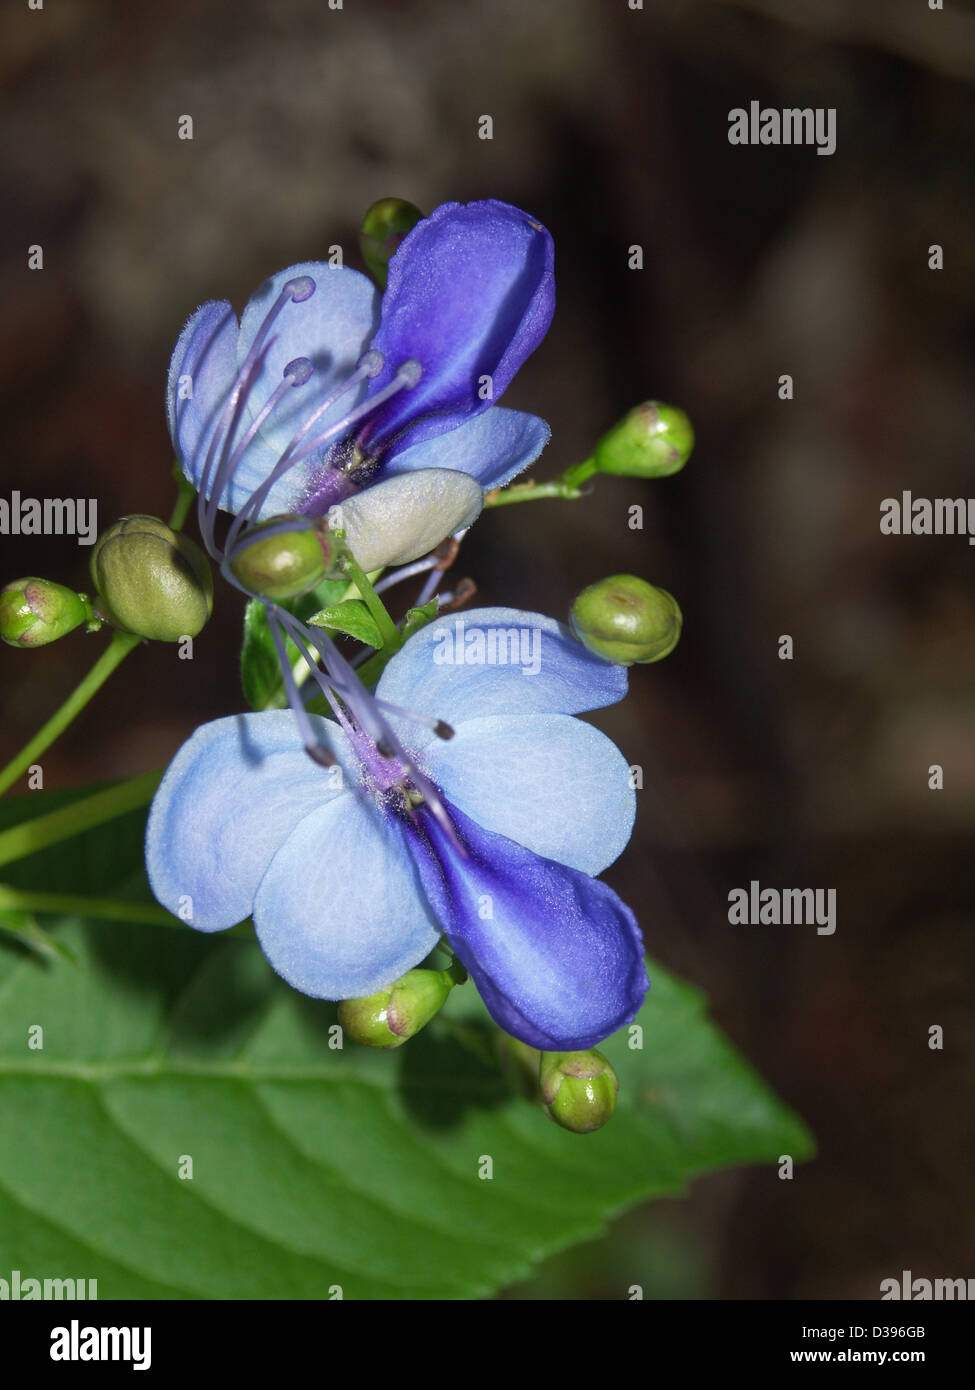 Bright blue flowers, buds, and leaves of Clerodendron ugandense - blue butterfly bush - against a dark background Stock Photo